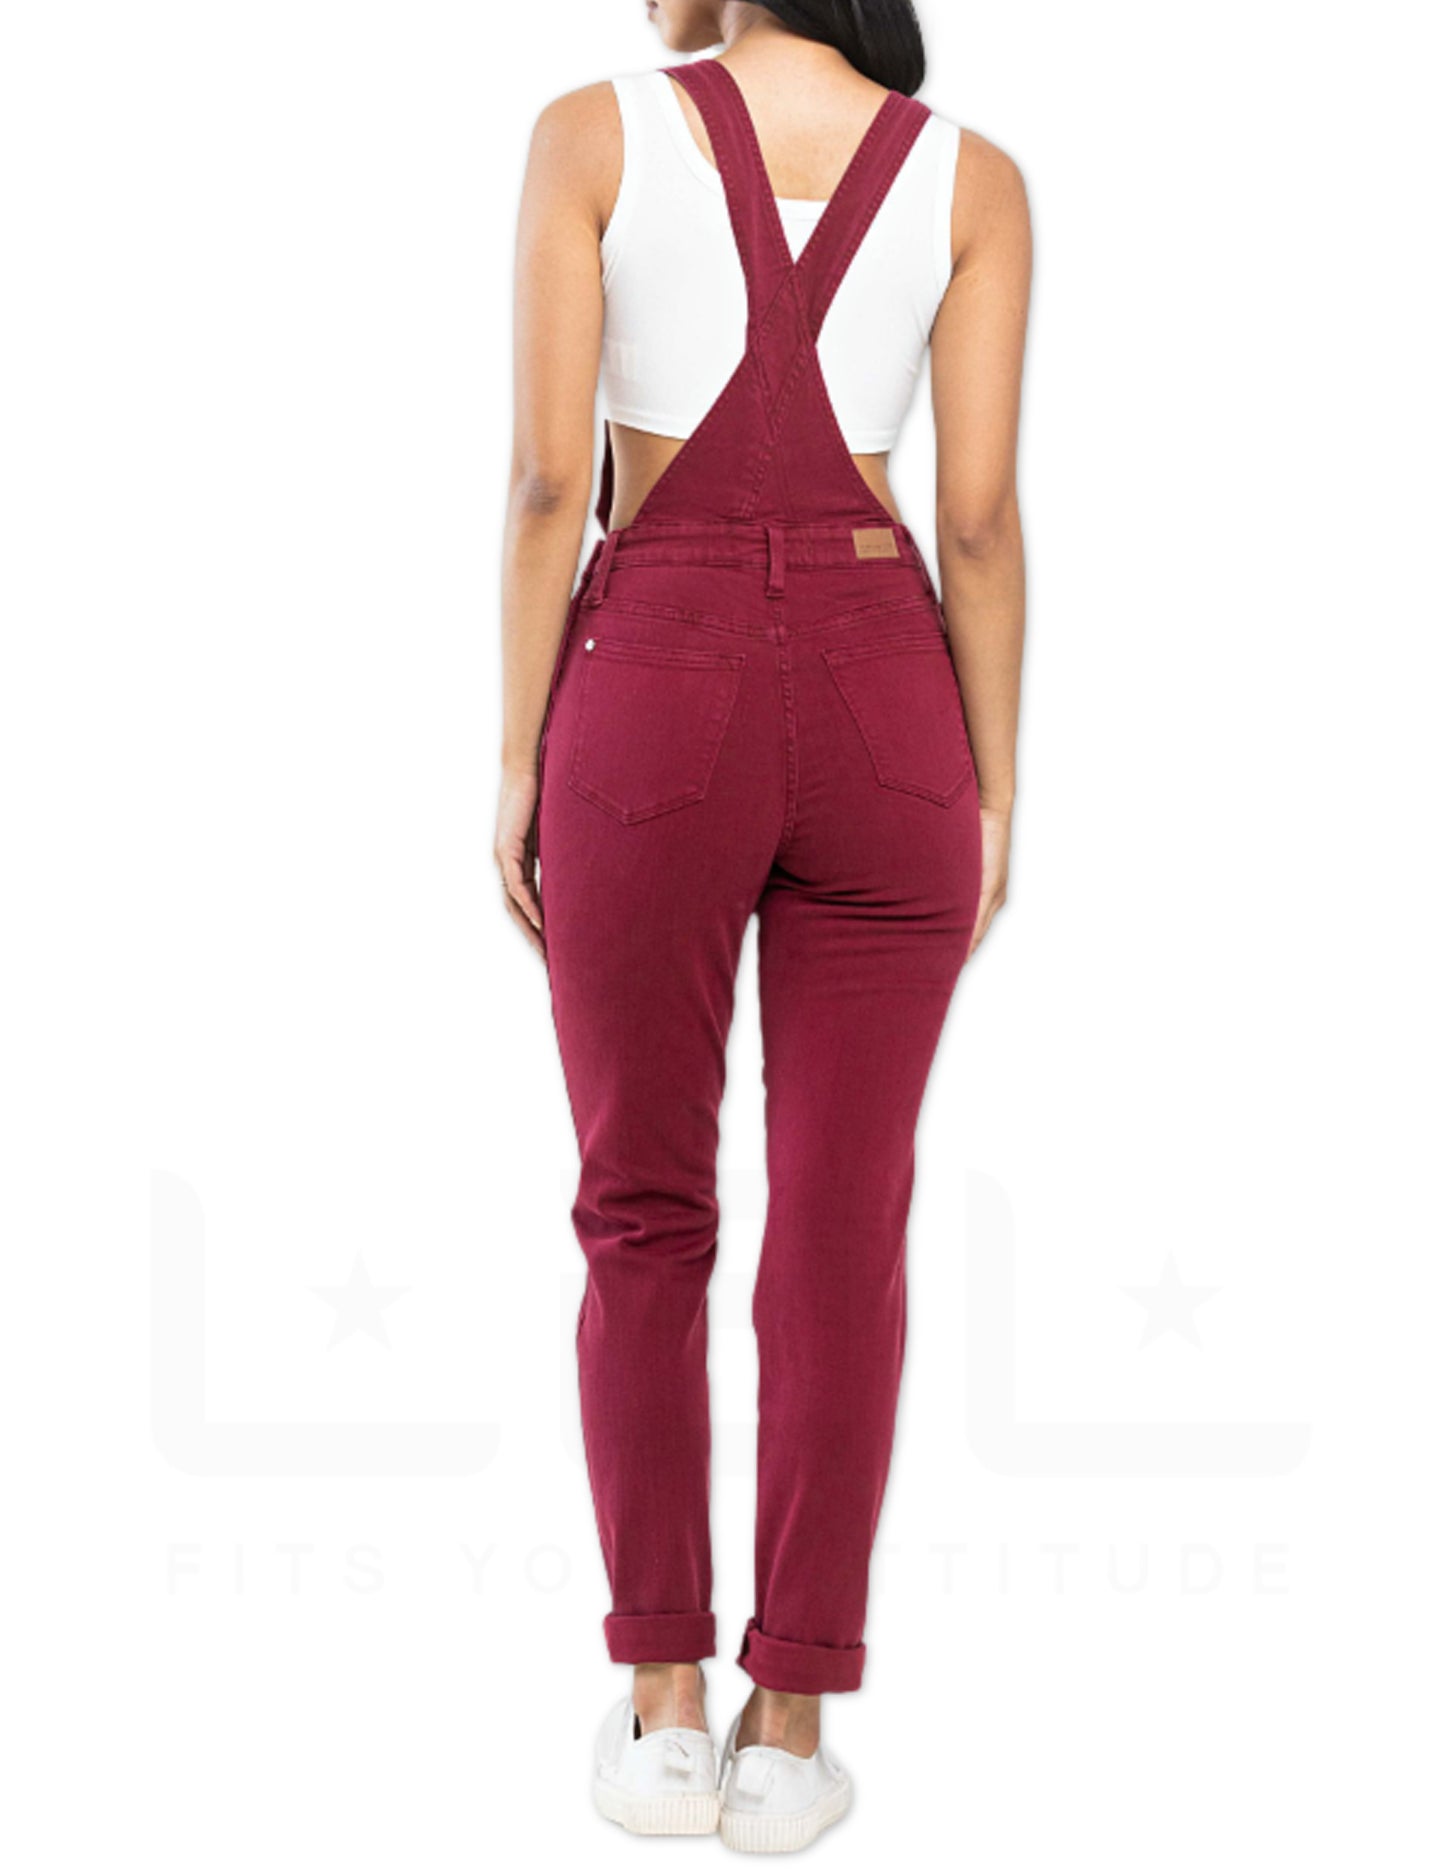 Double Cuff Overalls - Burgundy